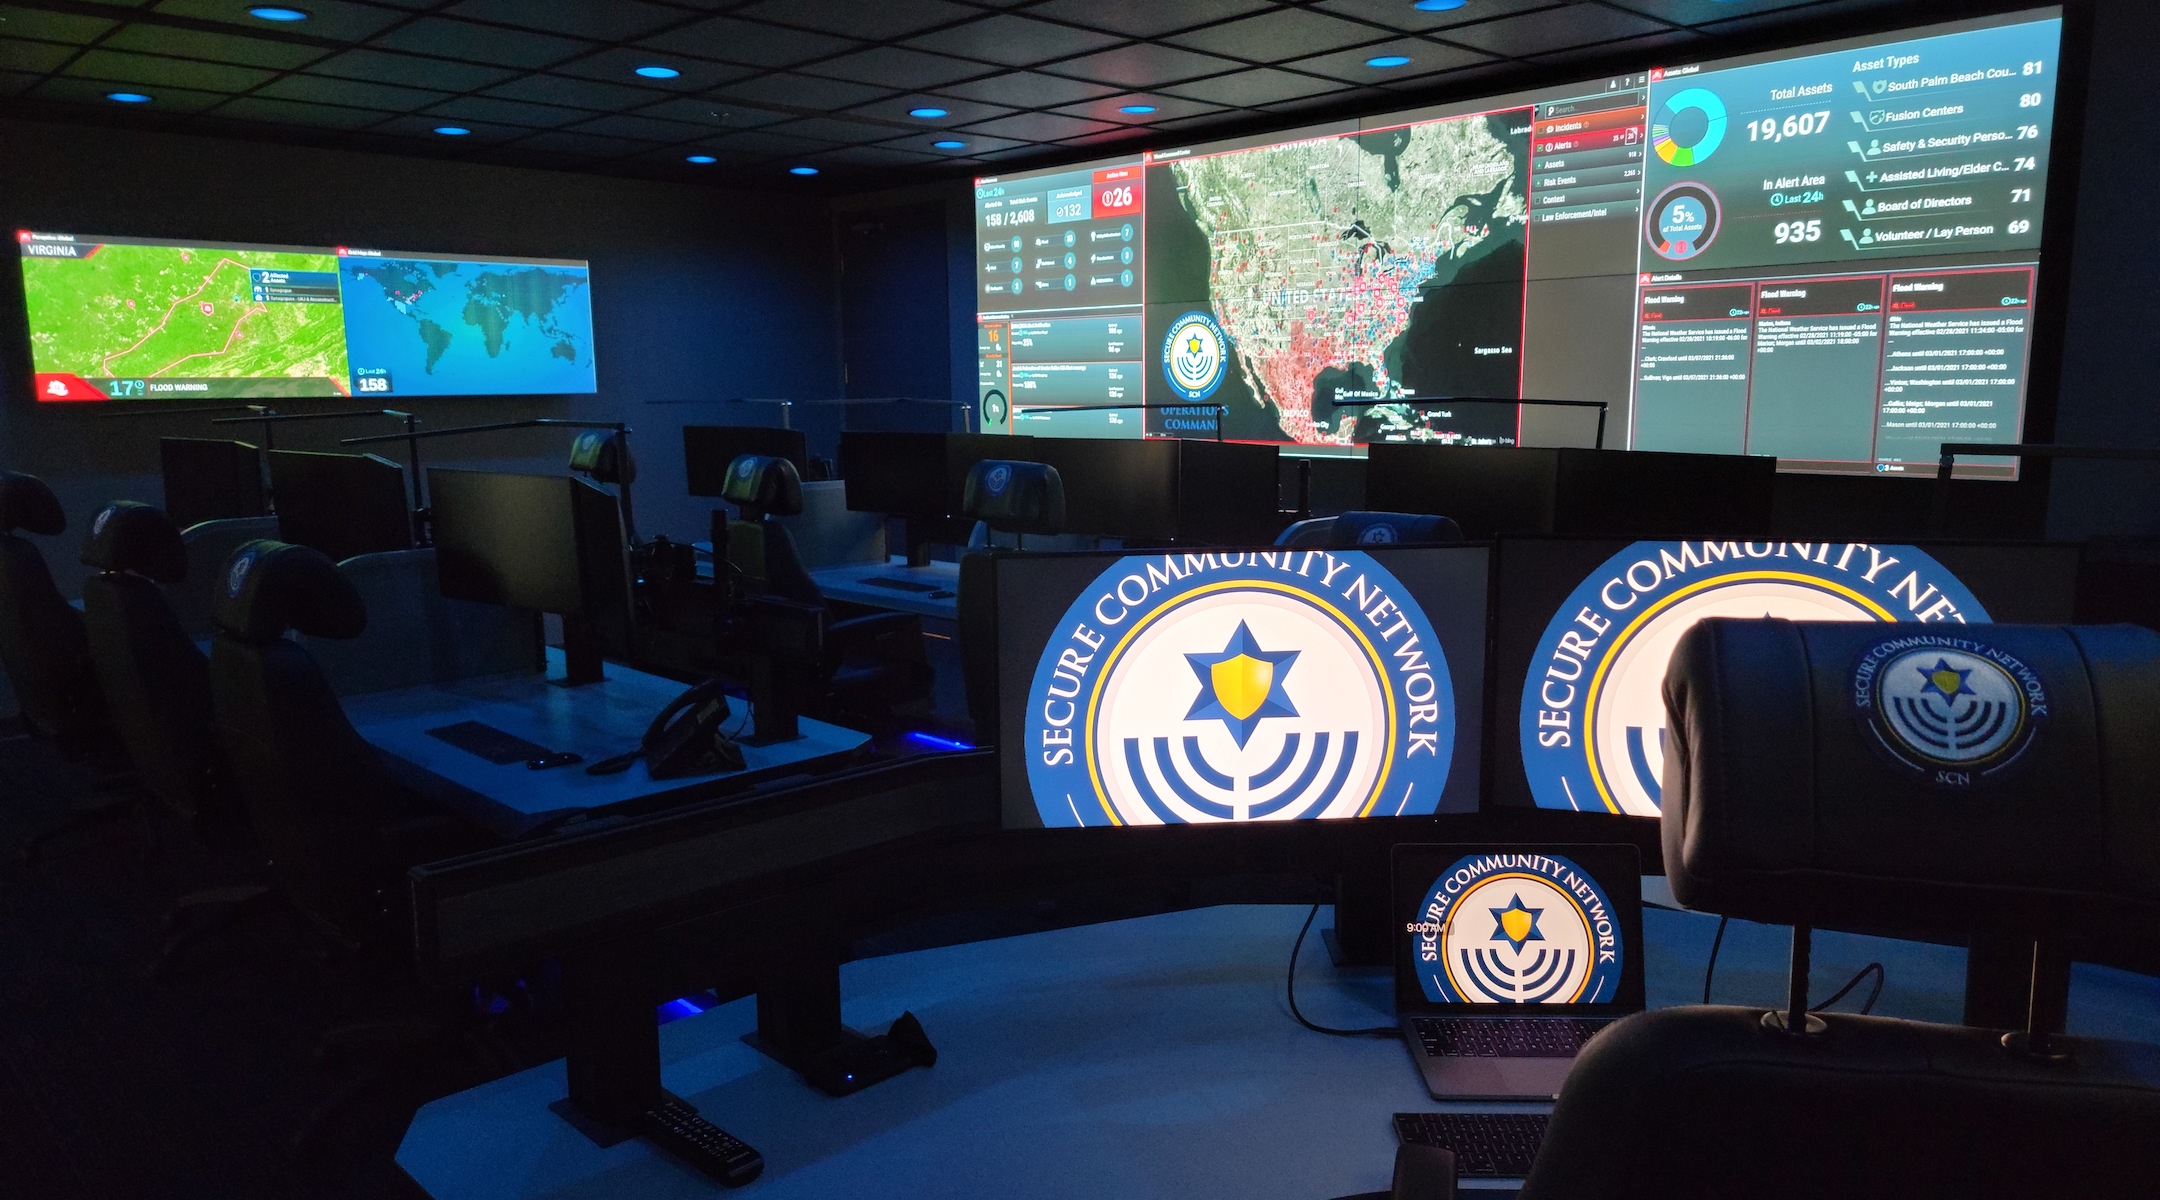 secure community network command center